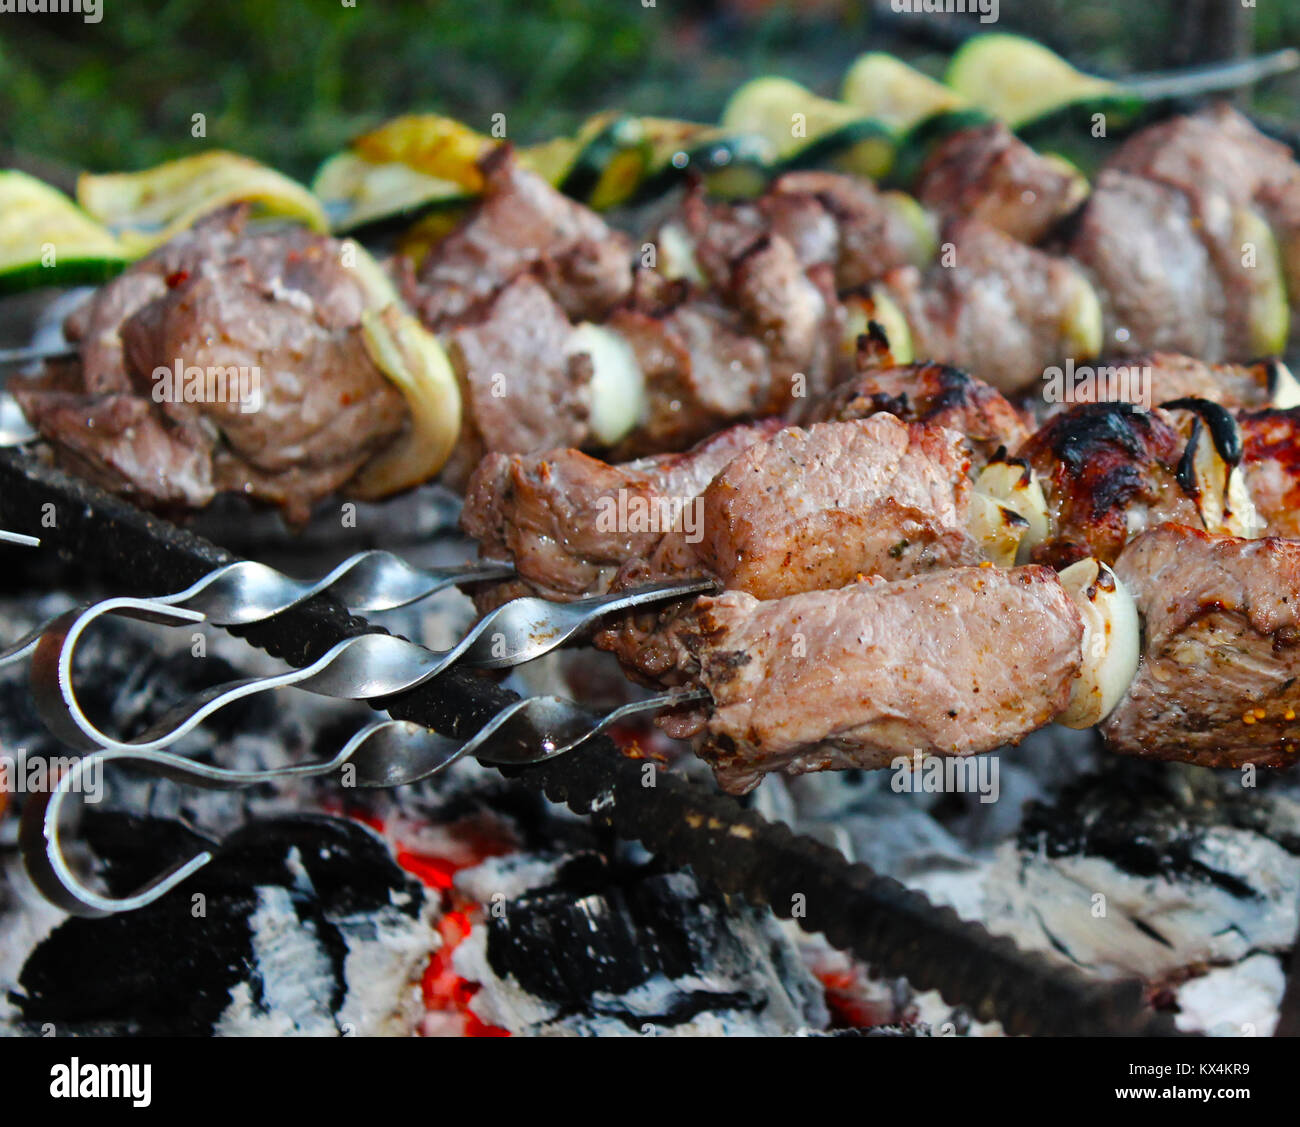 shish kebab on skewers on fire close-up Stock Photo